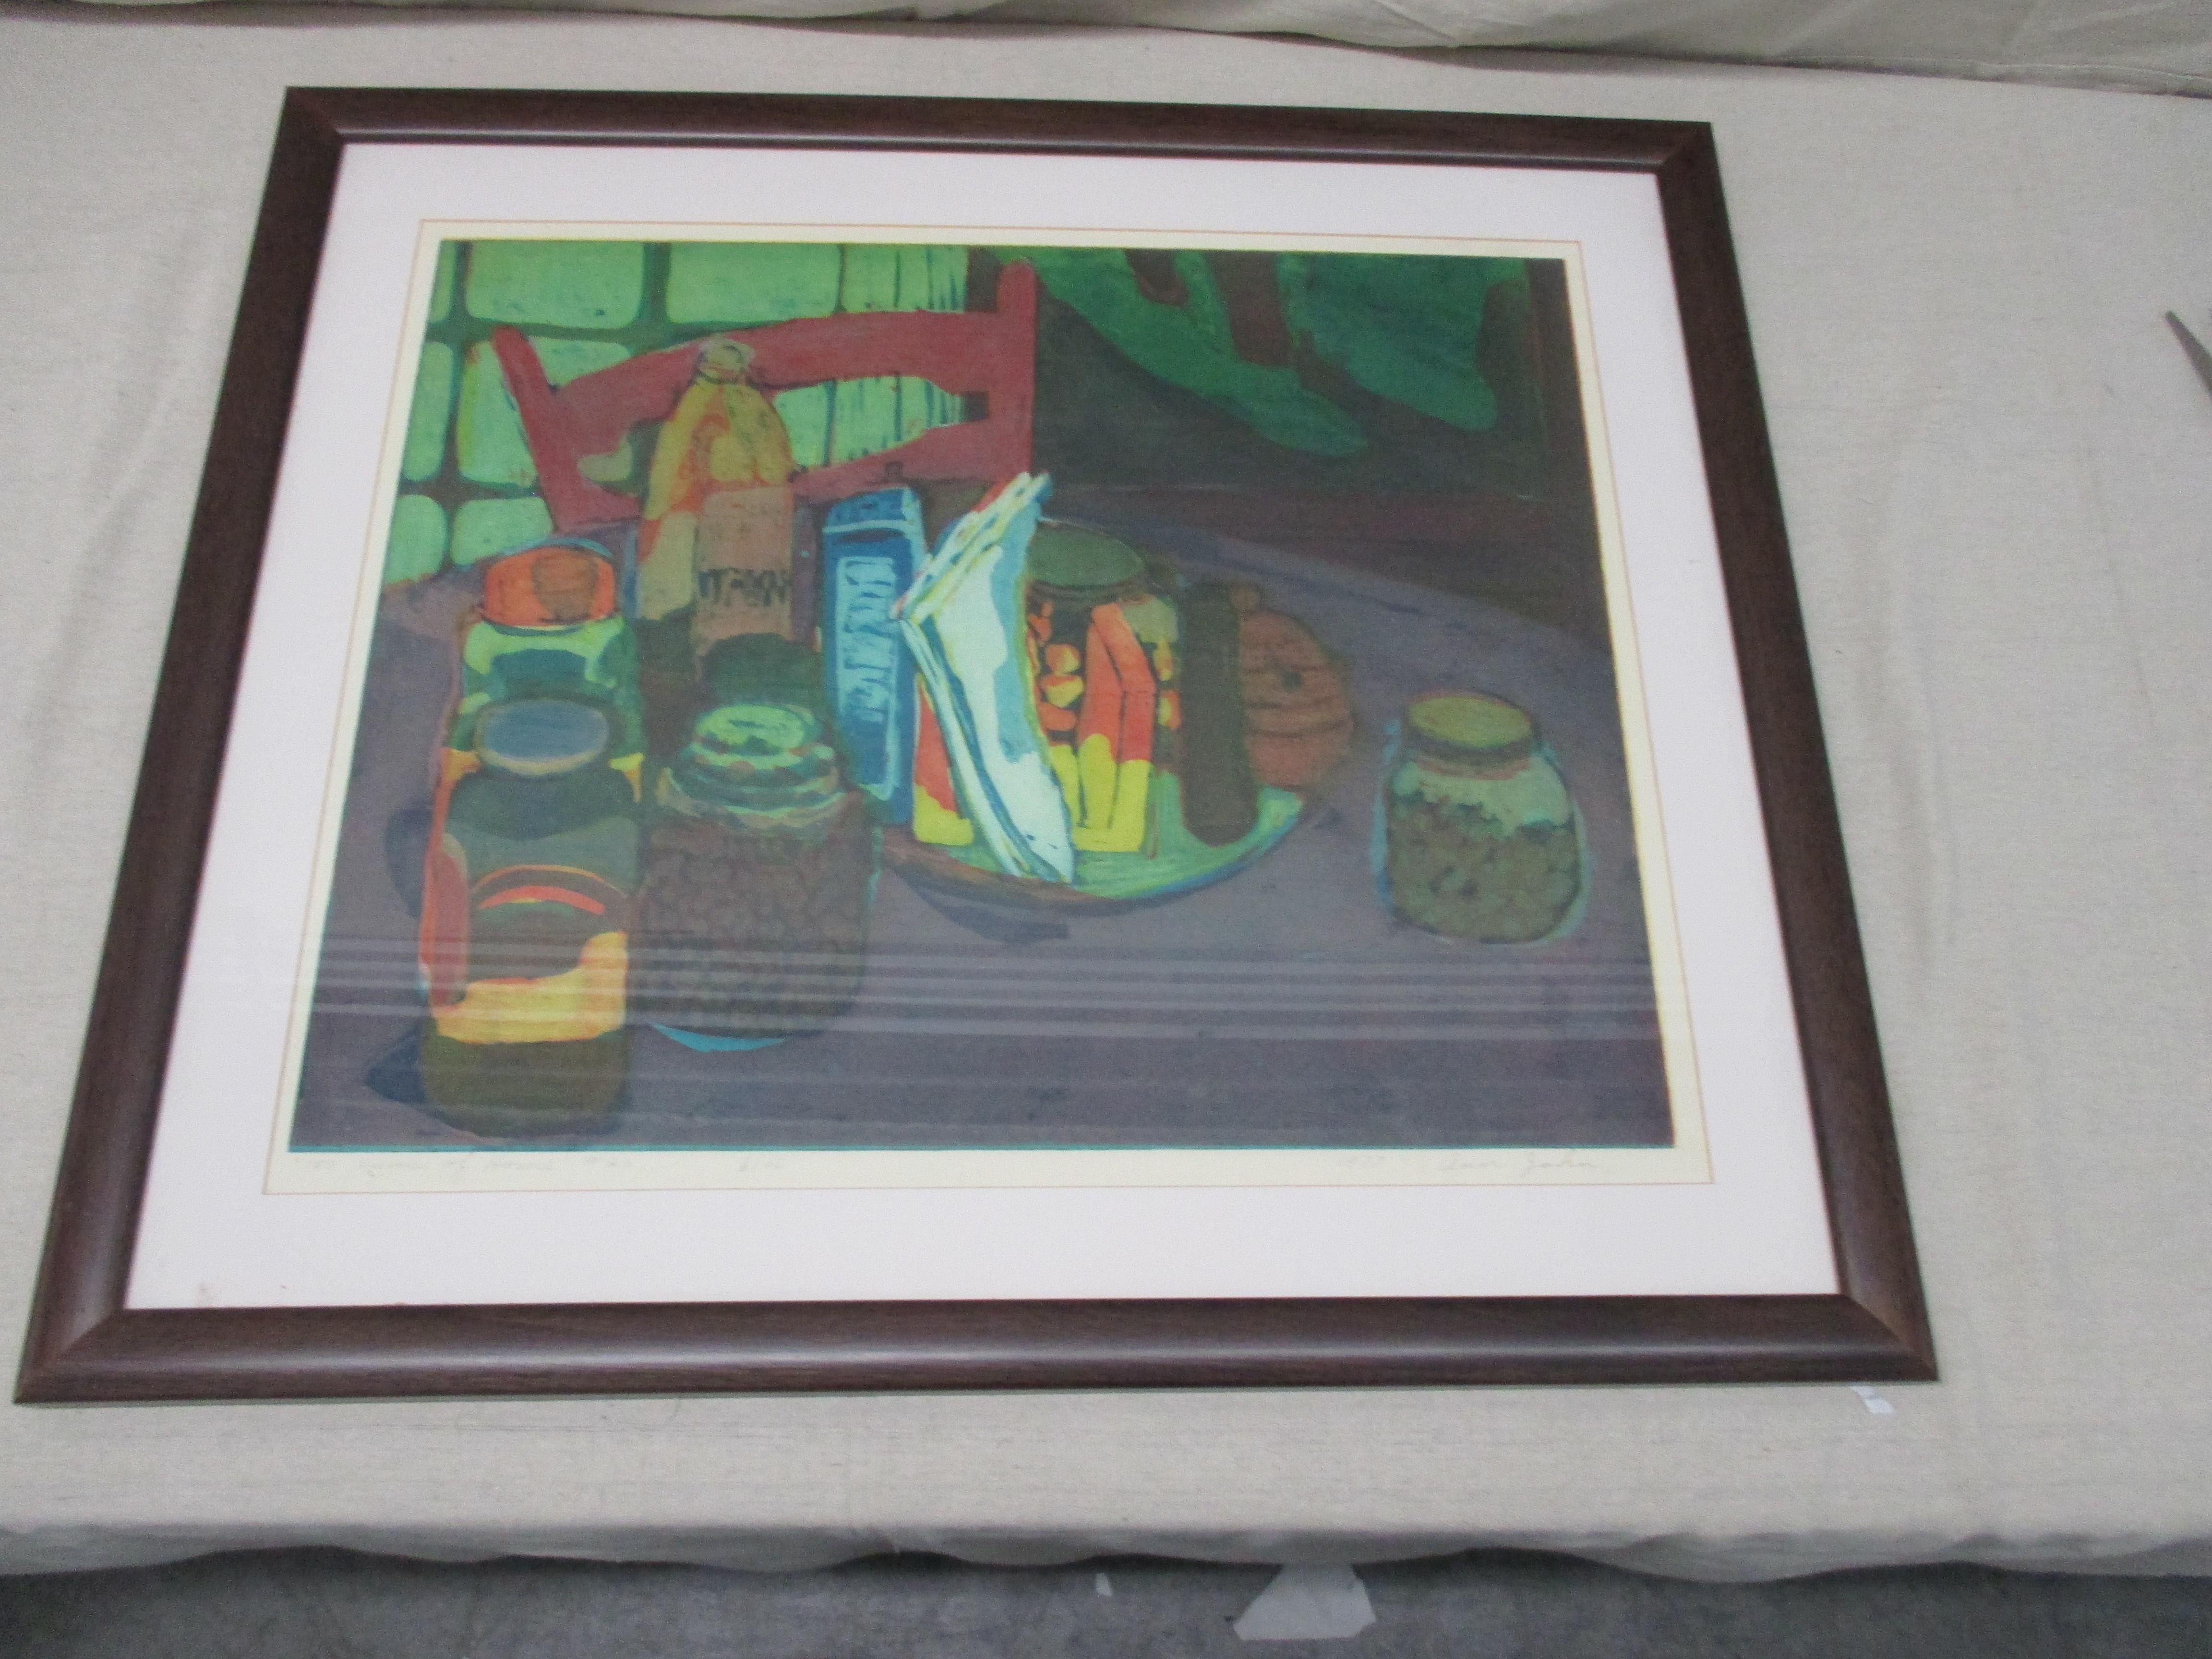 Vintage framed print by Ann Zahn 100 views of home #23
USA, 1977
6/20
Size: 28.5 x 25
Image size is: 21 x 17.